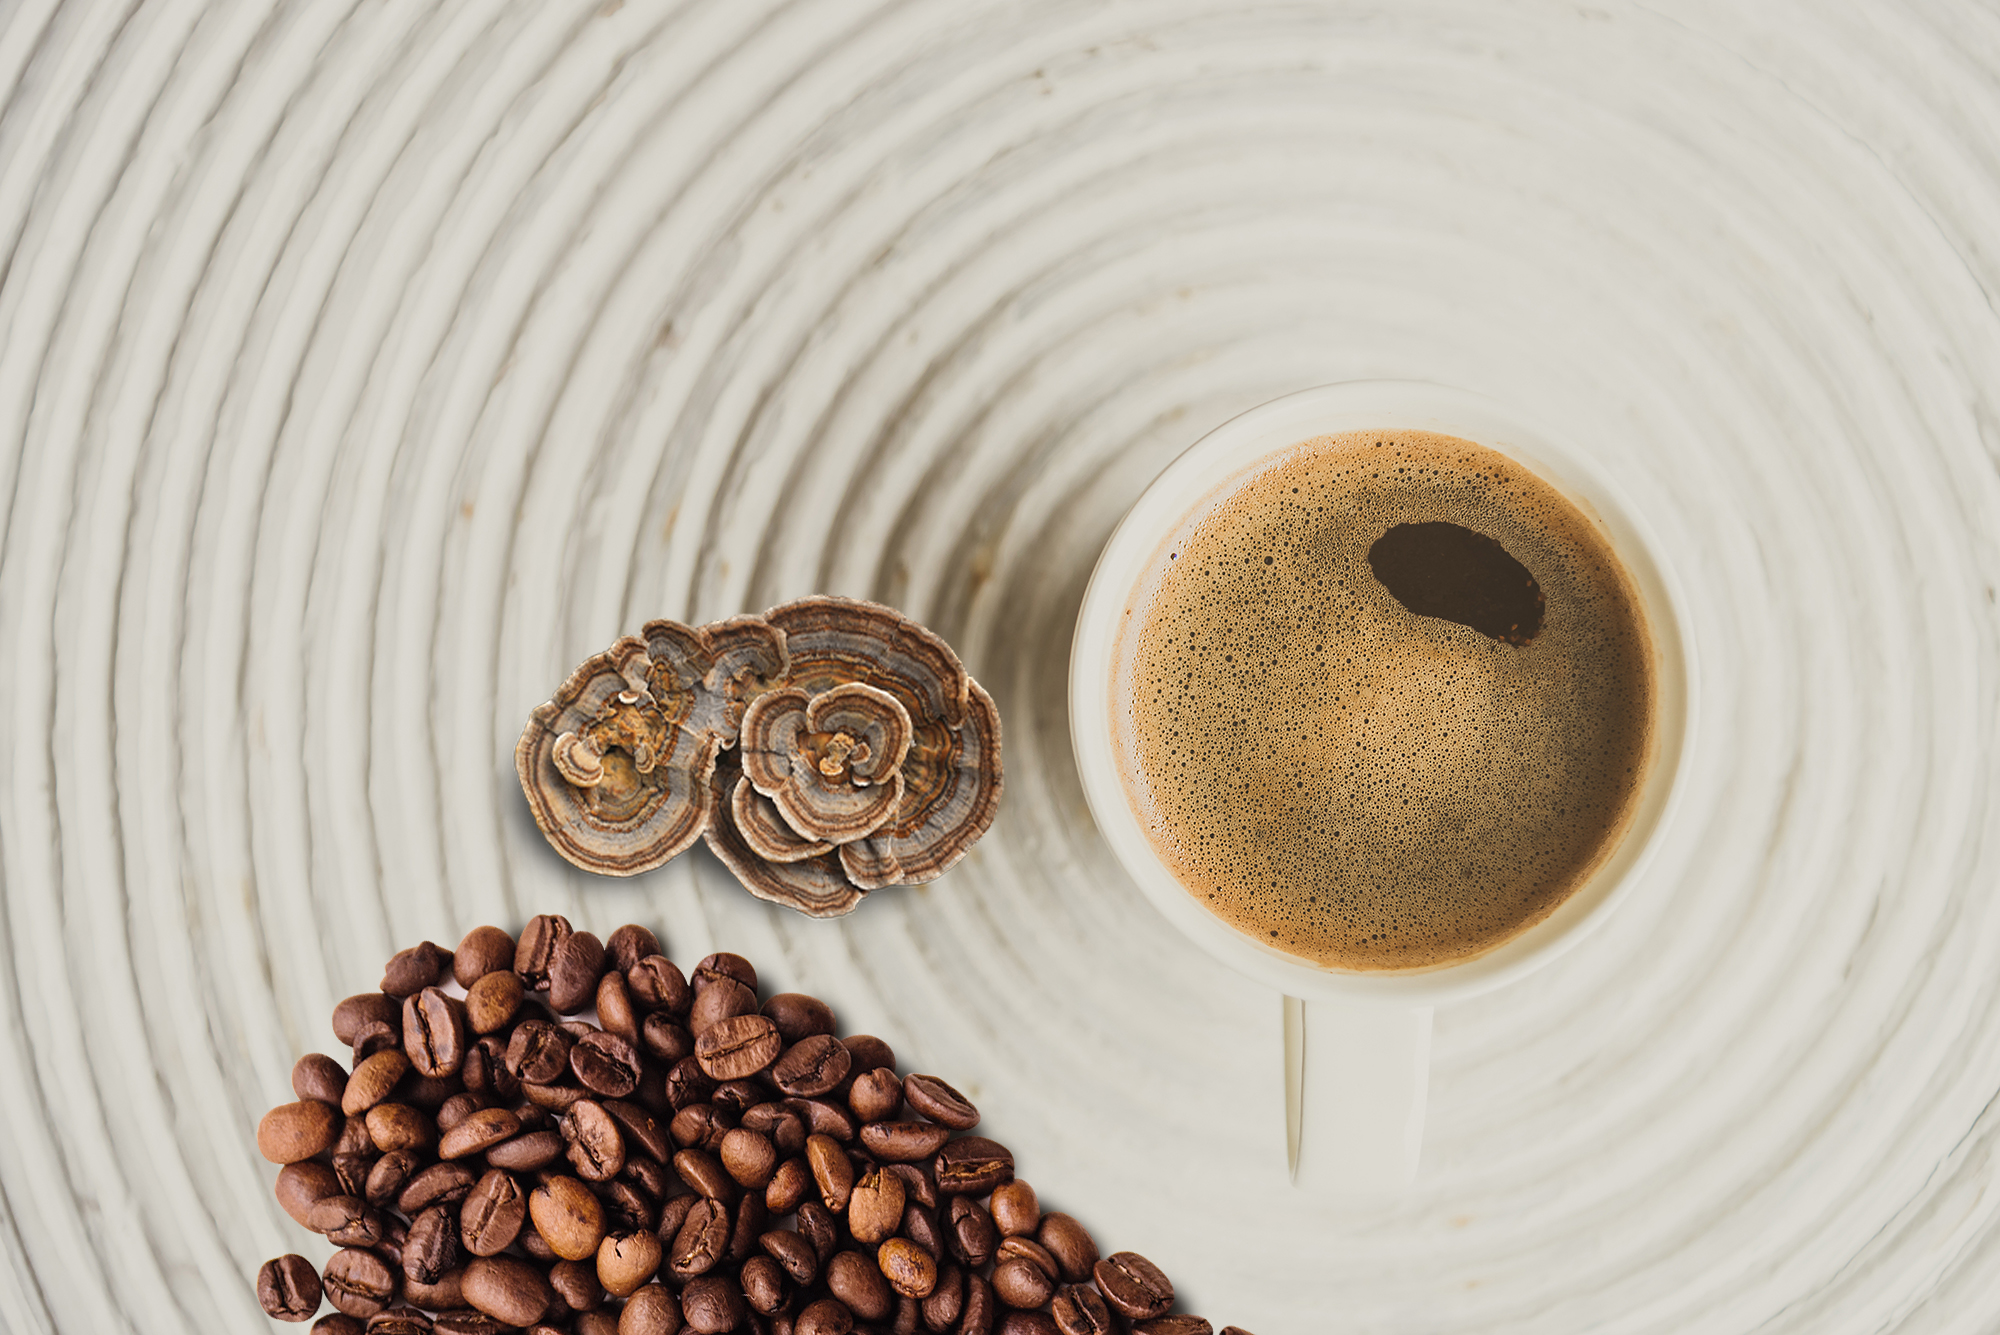 Mushroom Coffee: a real nutritional support or just another fad?